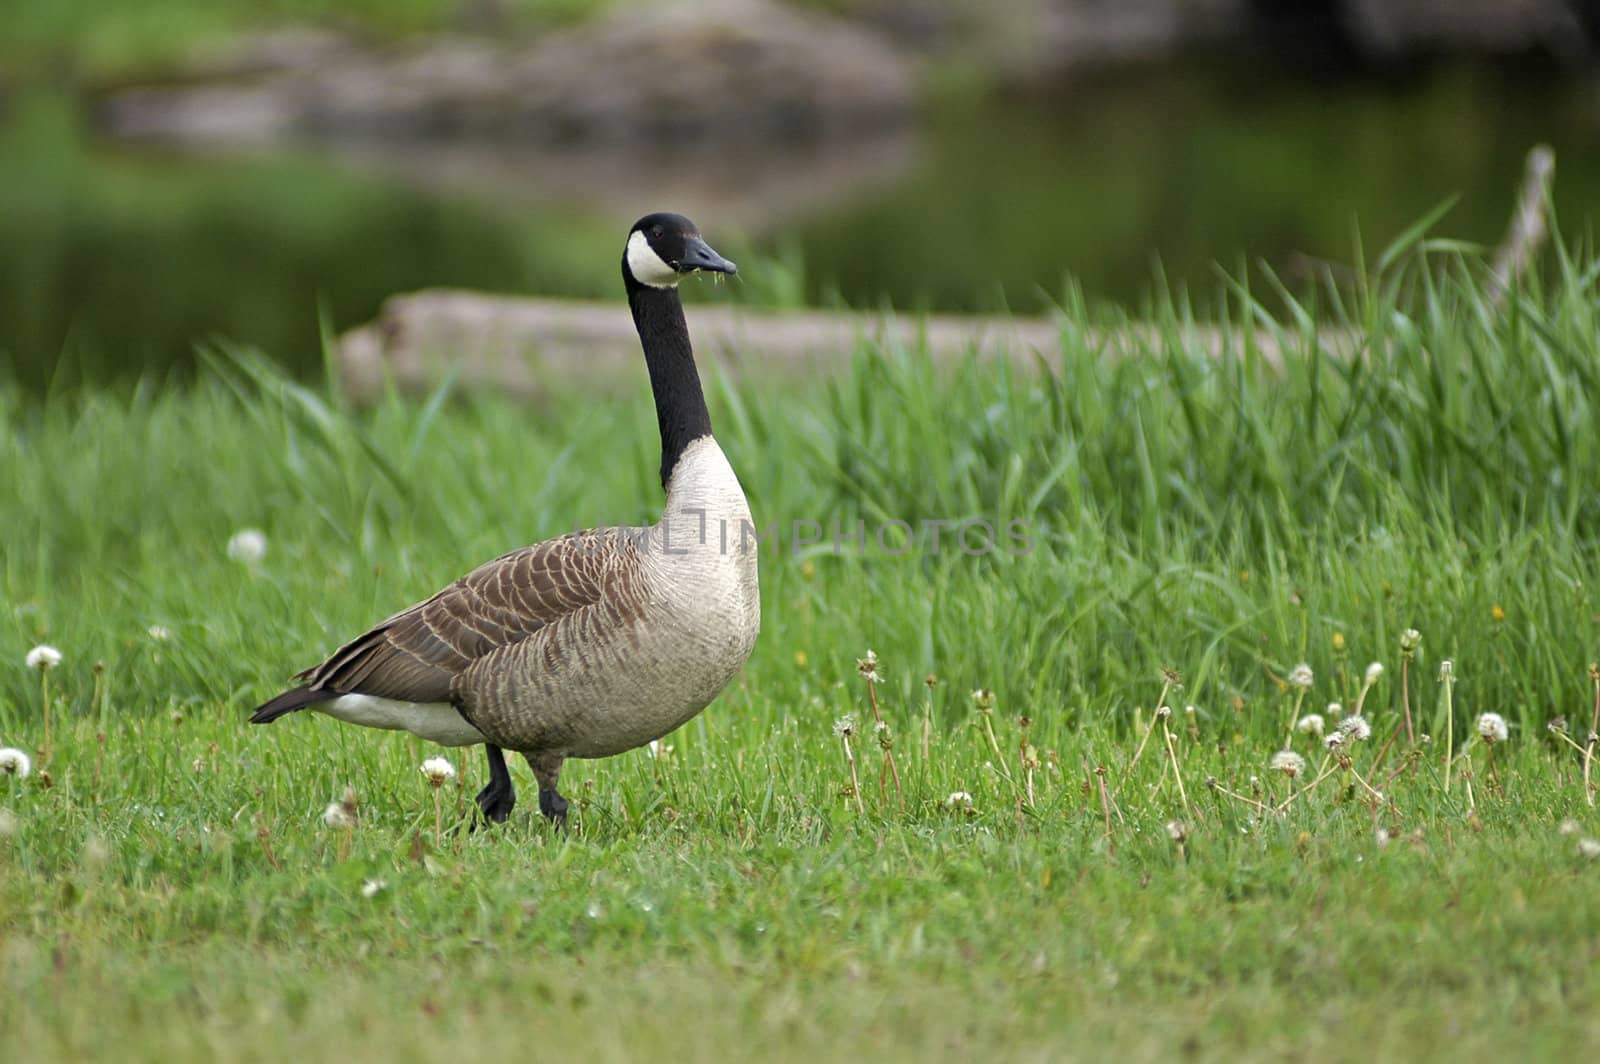 Goose eating grass by the pond